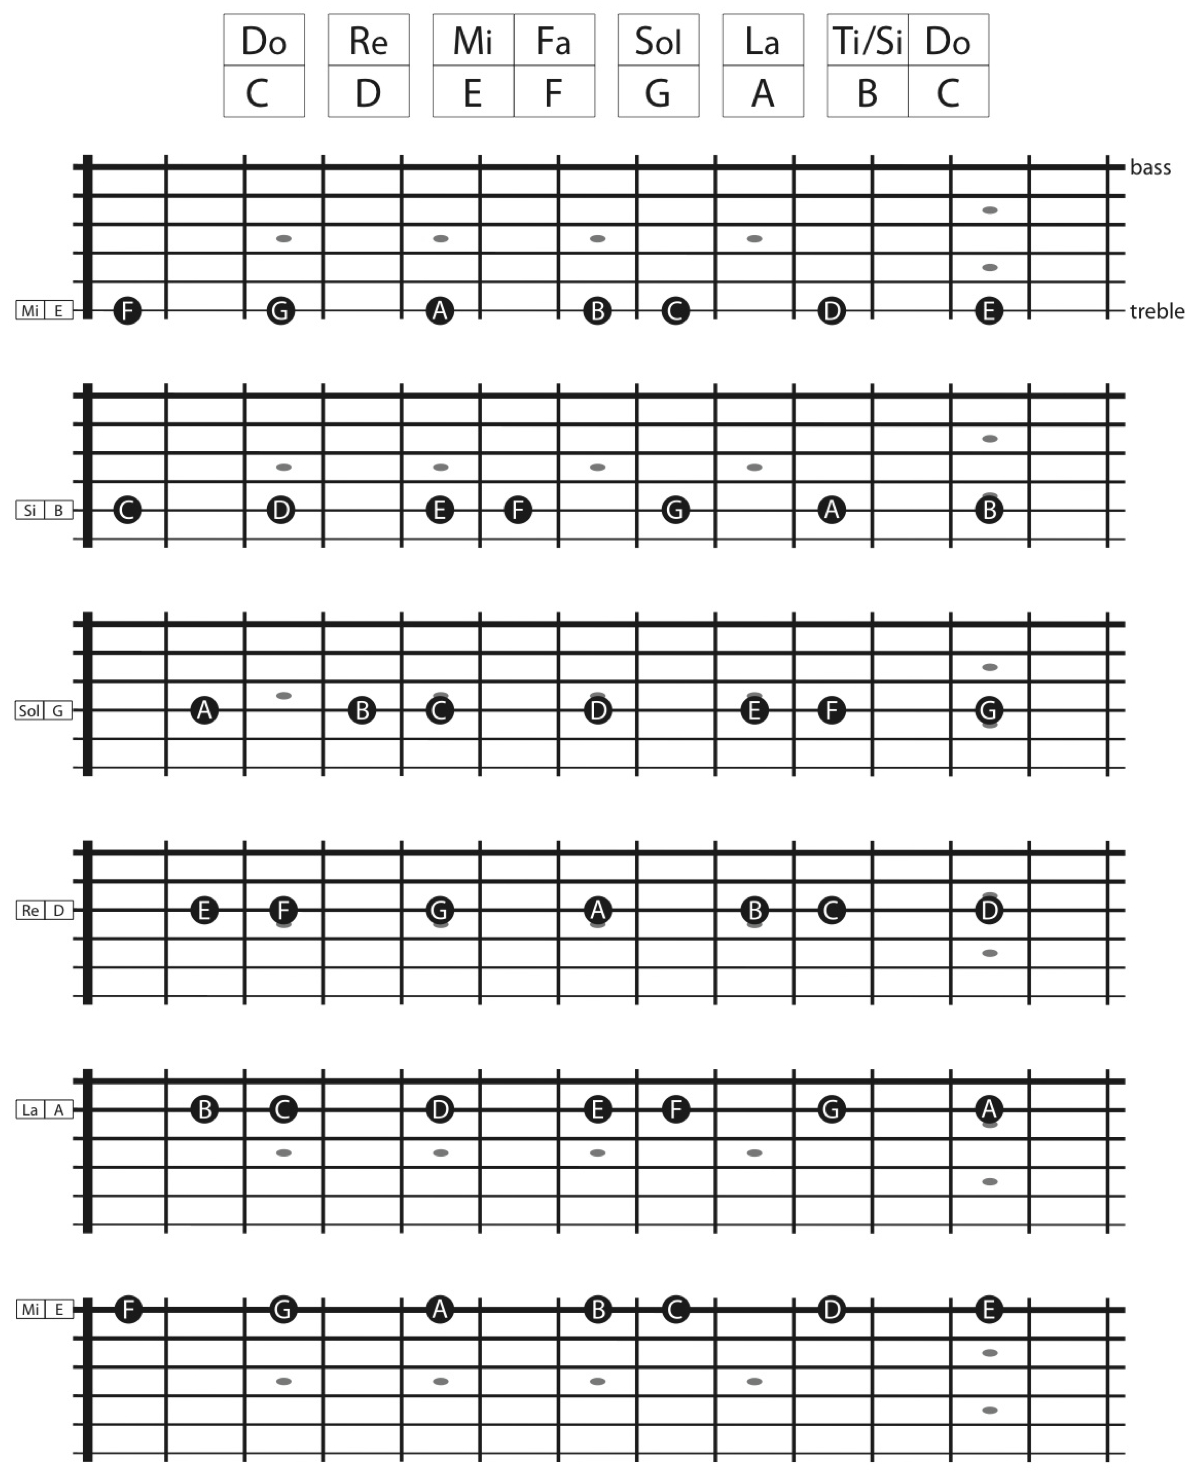 The C major scale mapped out on each string